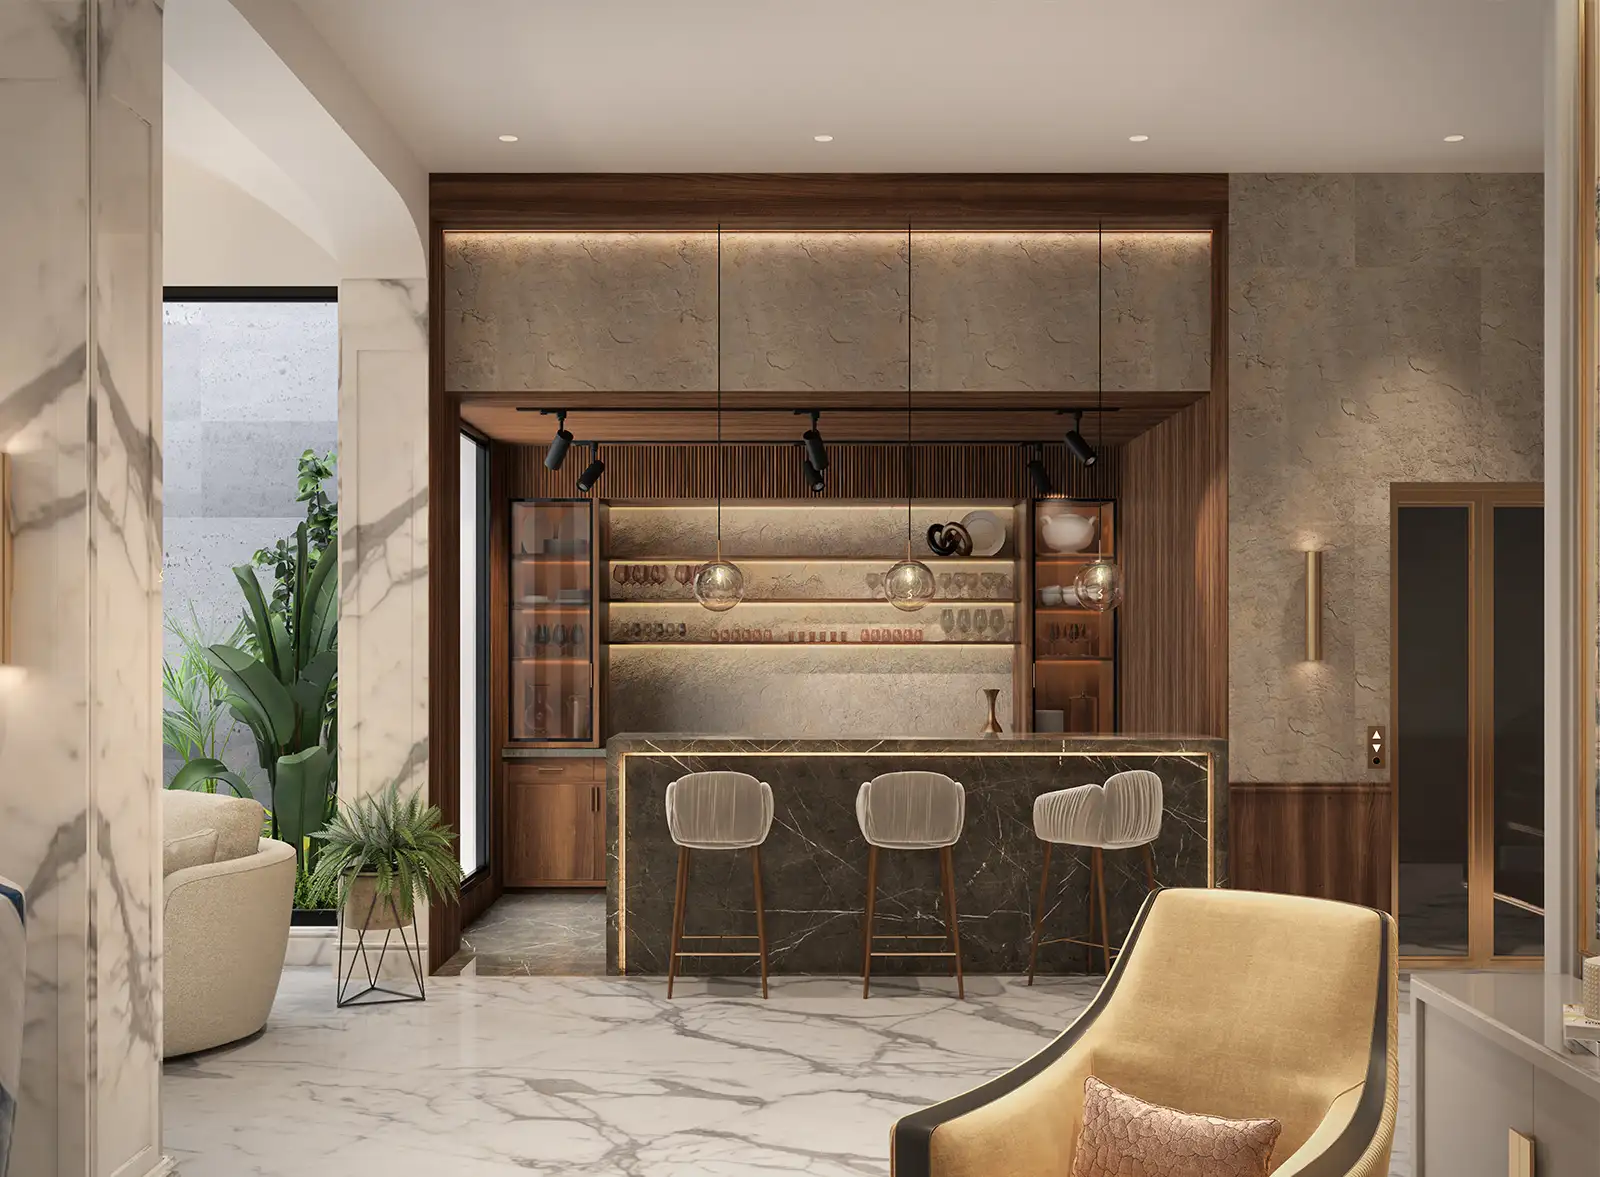 Elegant home bar in a modern interior design setting with marble countertops, wood cabinetry, and stylish seating, ideal for sophisticated entertaining.